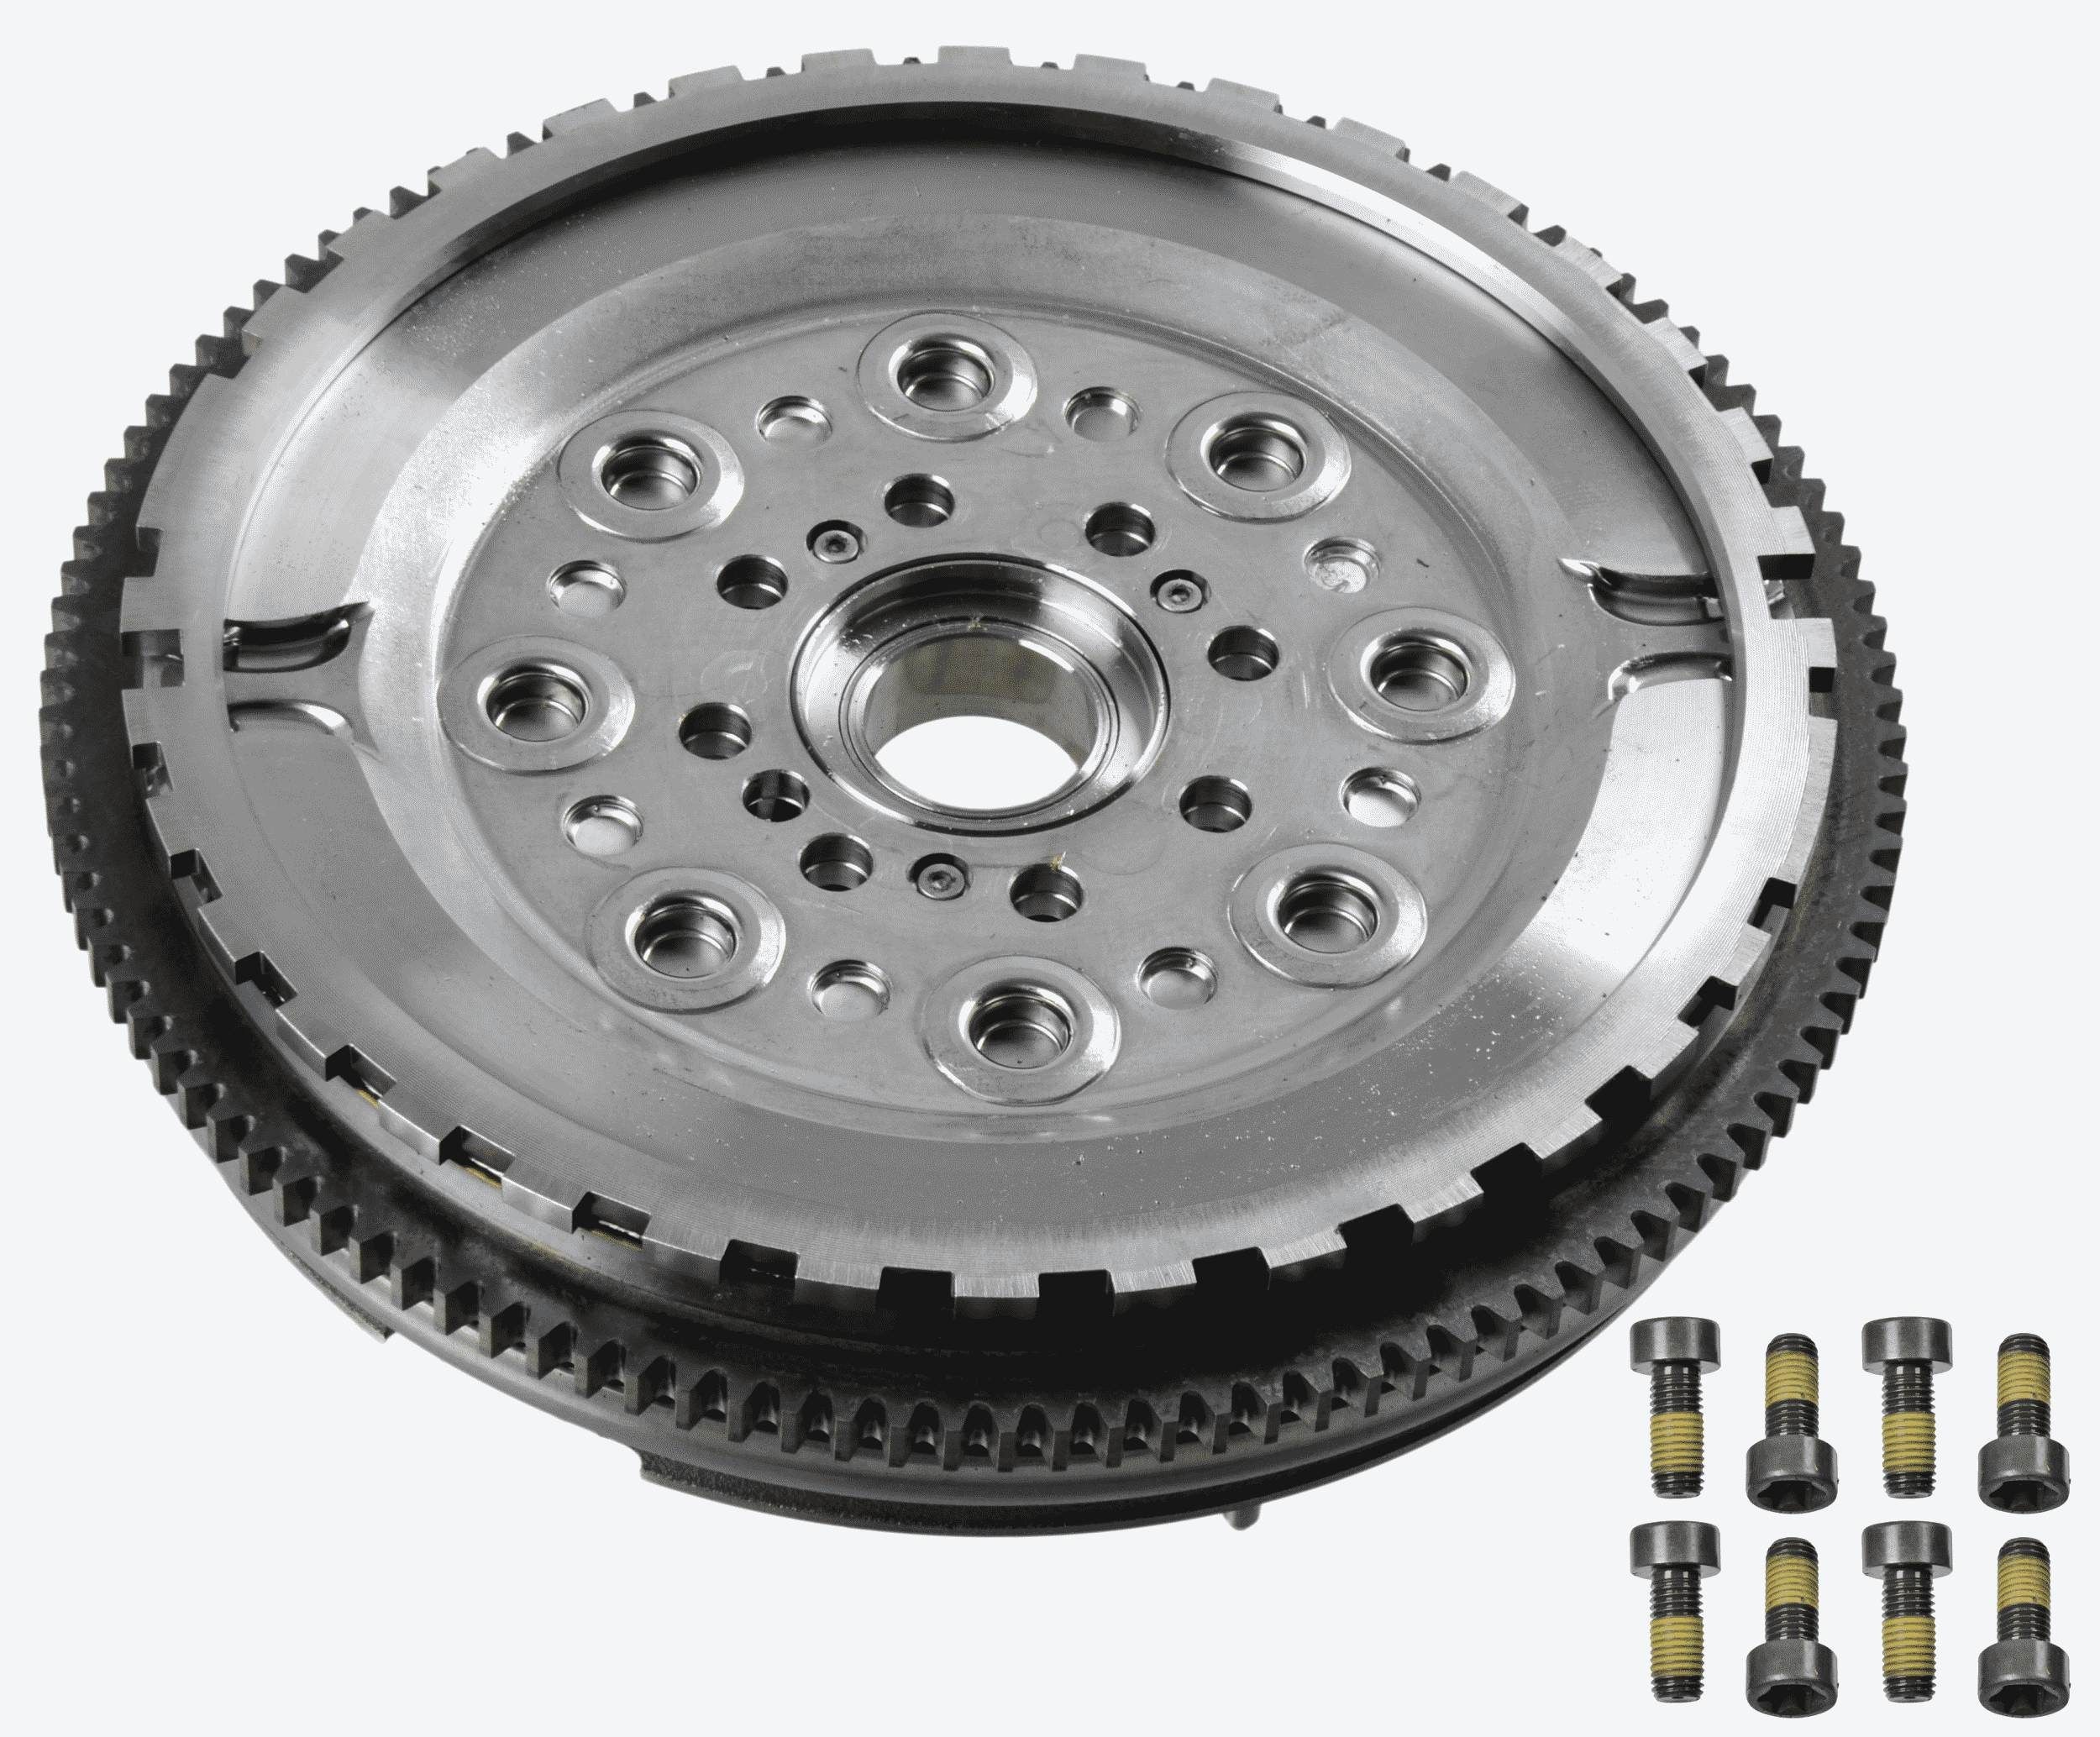 SACHS Dual clutch flywheel 2294 001 513 for FORD TRANSIT, MONDEO